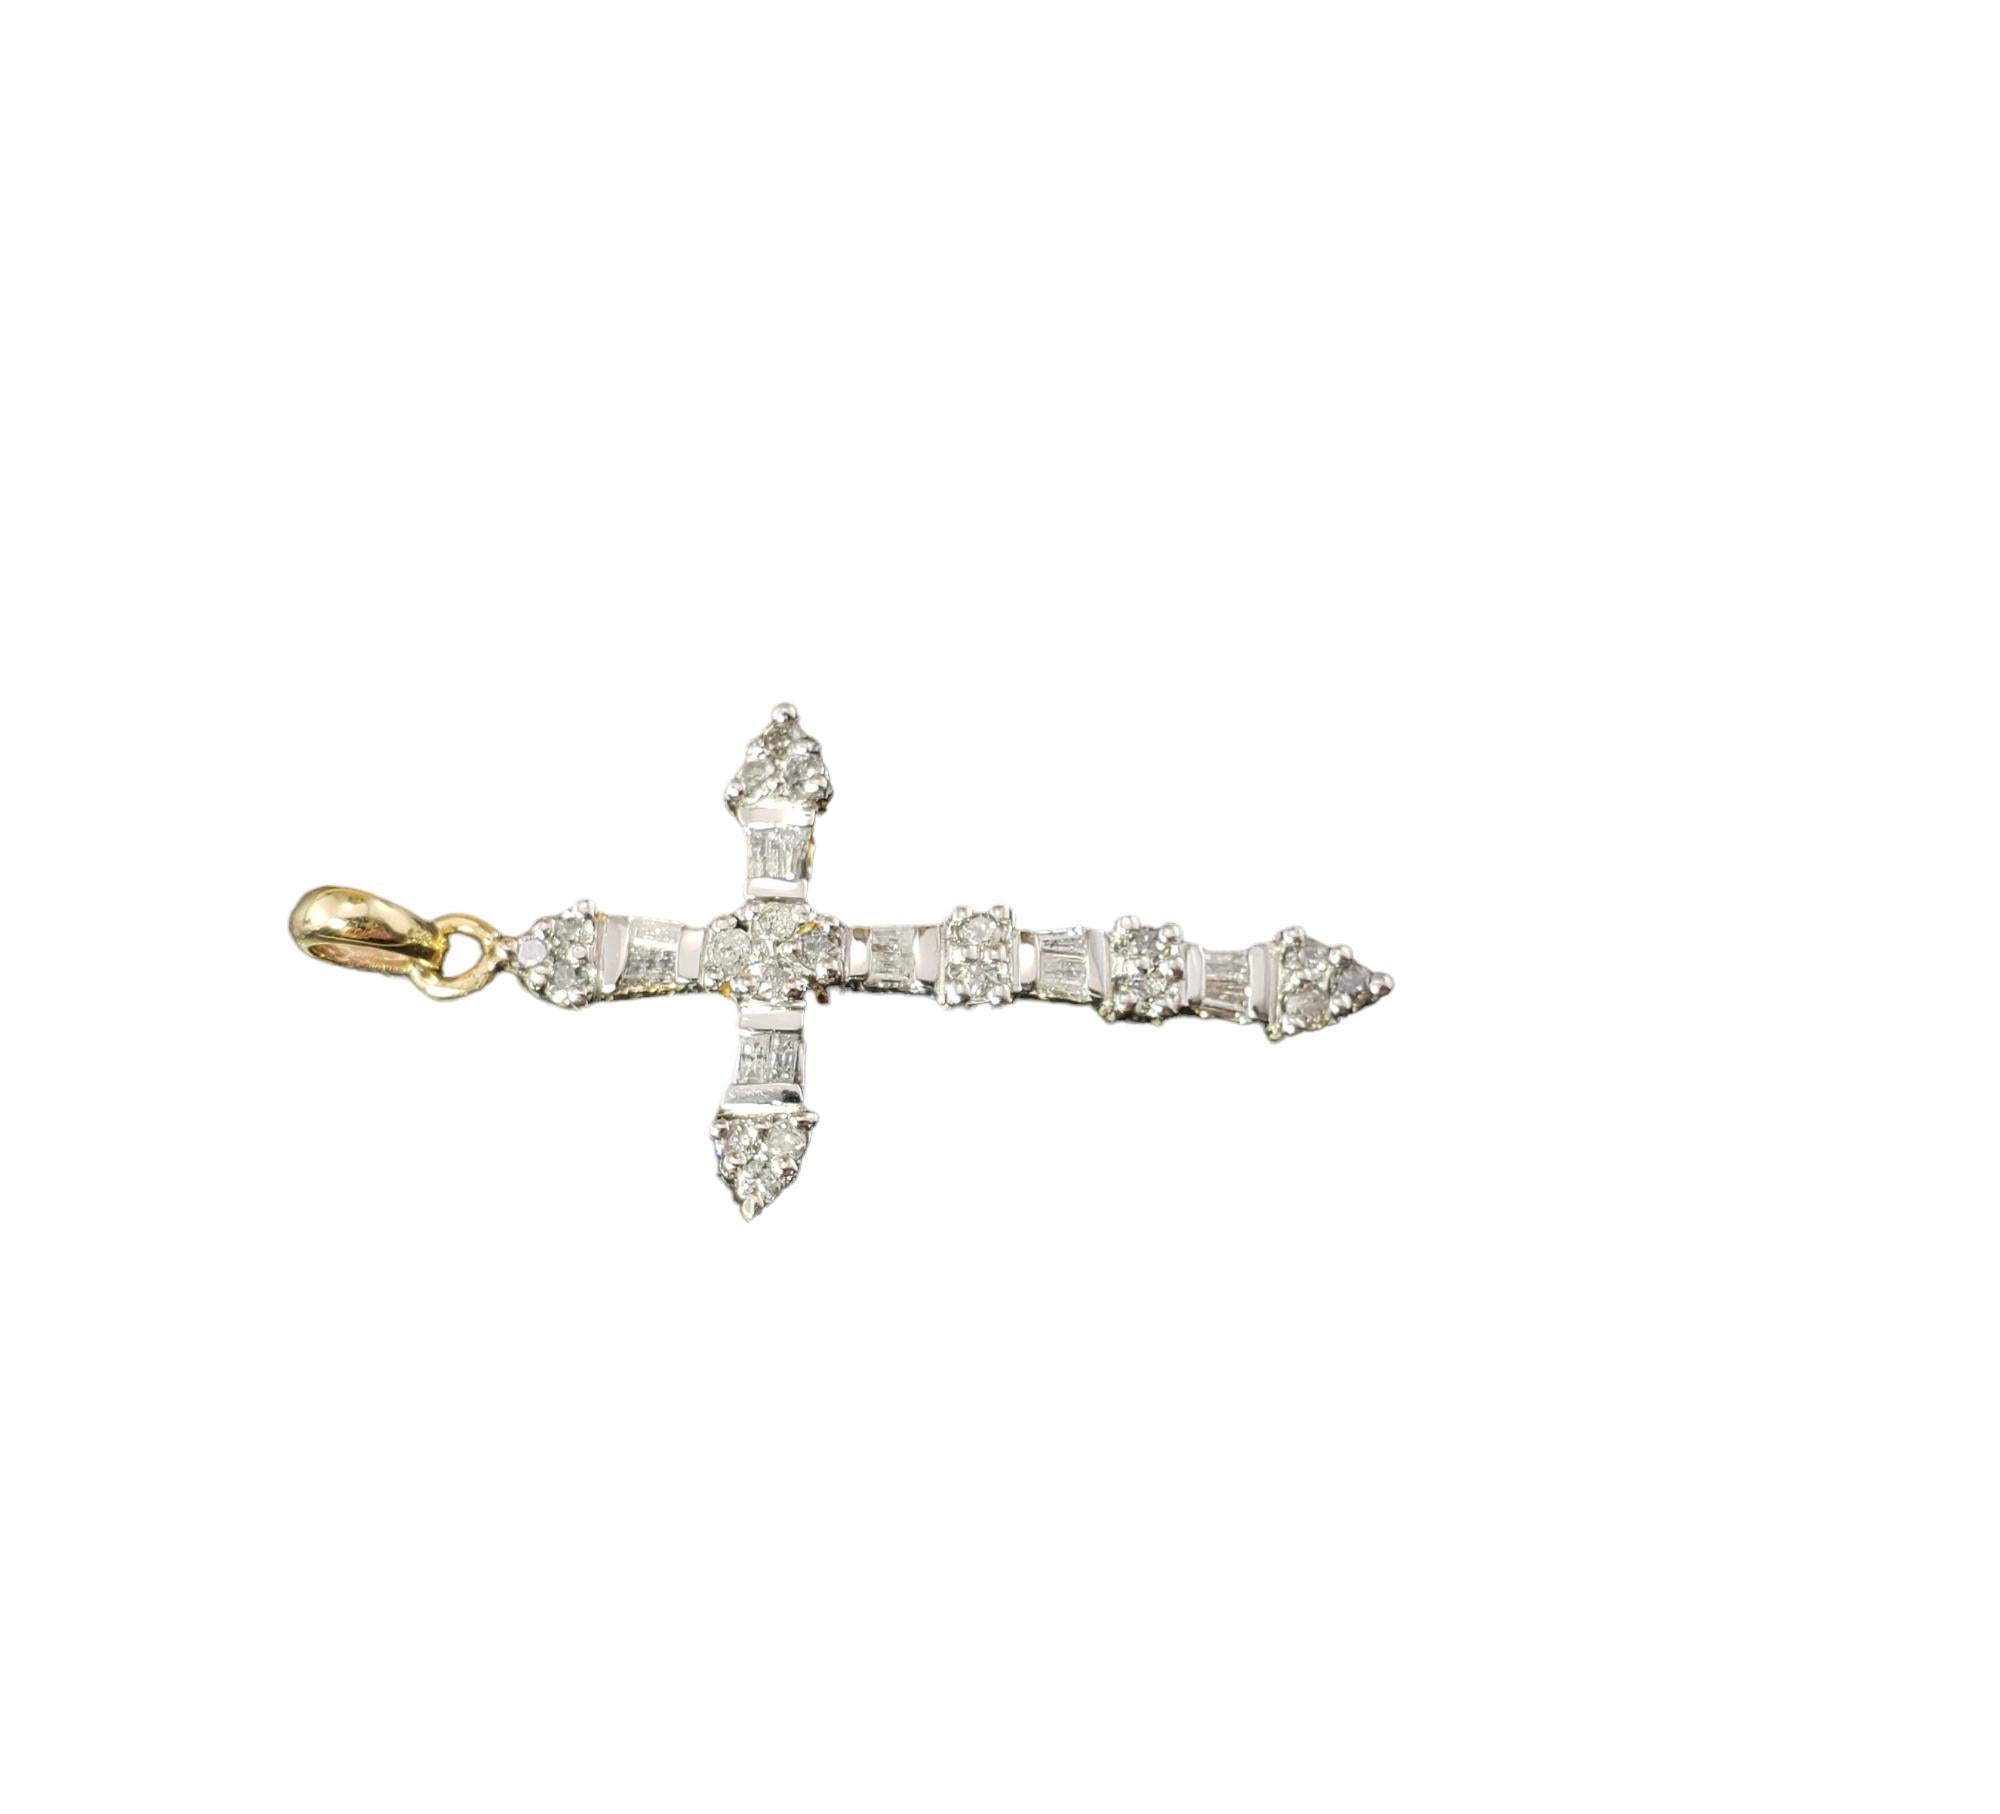 Vintage 10 Karat Yellow and White Gold and Diamond Cross Pendant-

This sparkling cross pendant features 20 round brilliant cut diamonds and 12 baguette cut diamonds set in classic 10K yellow and white gold.

Approximate total diamond weight: .30